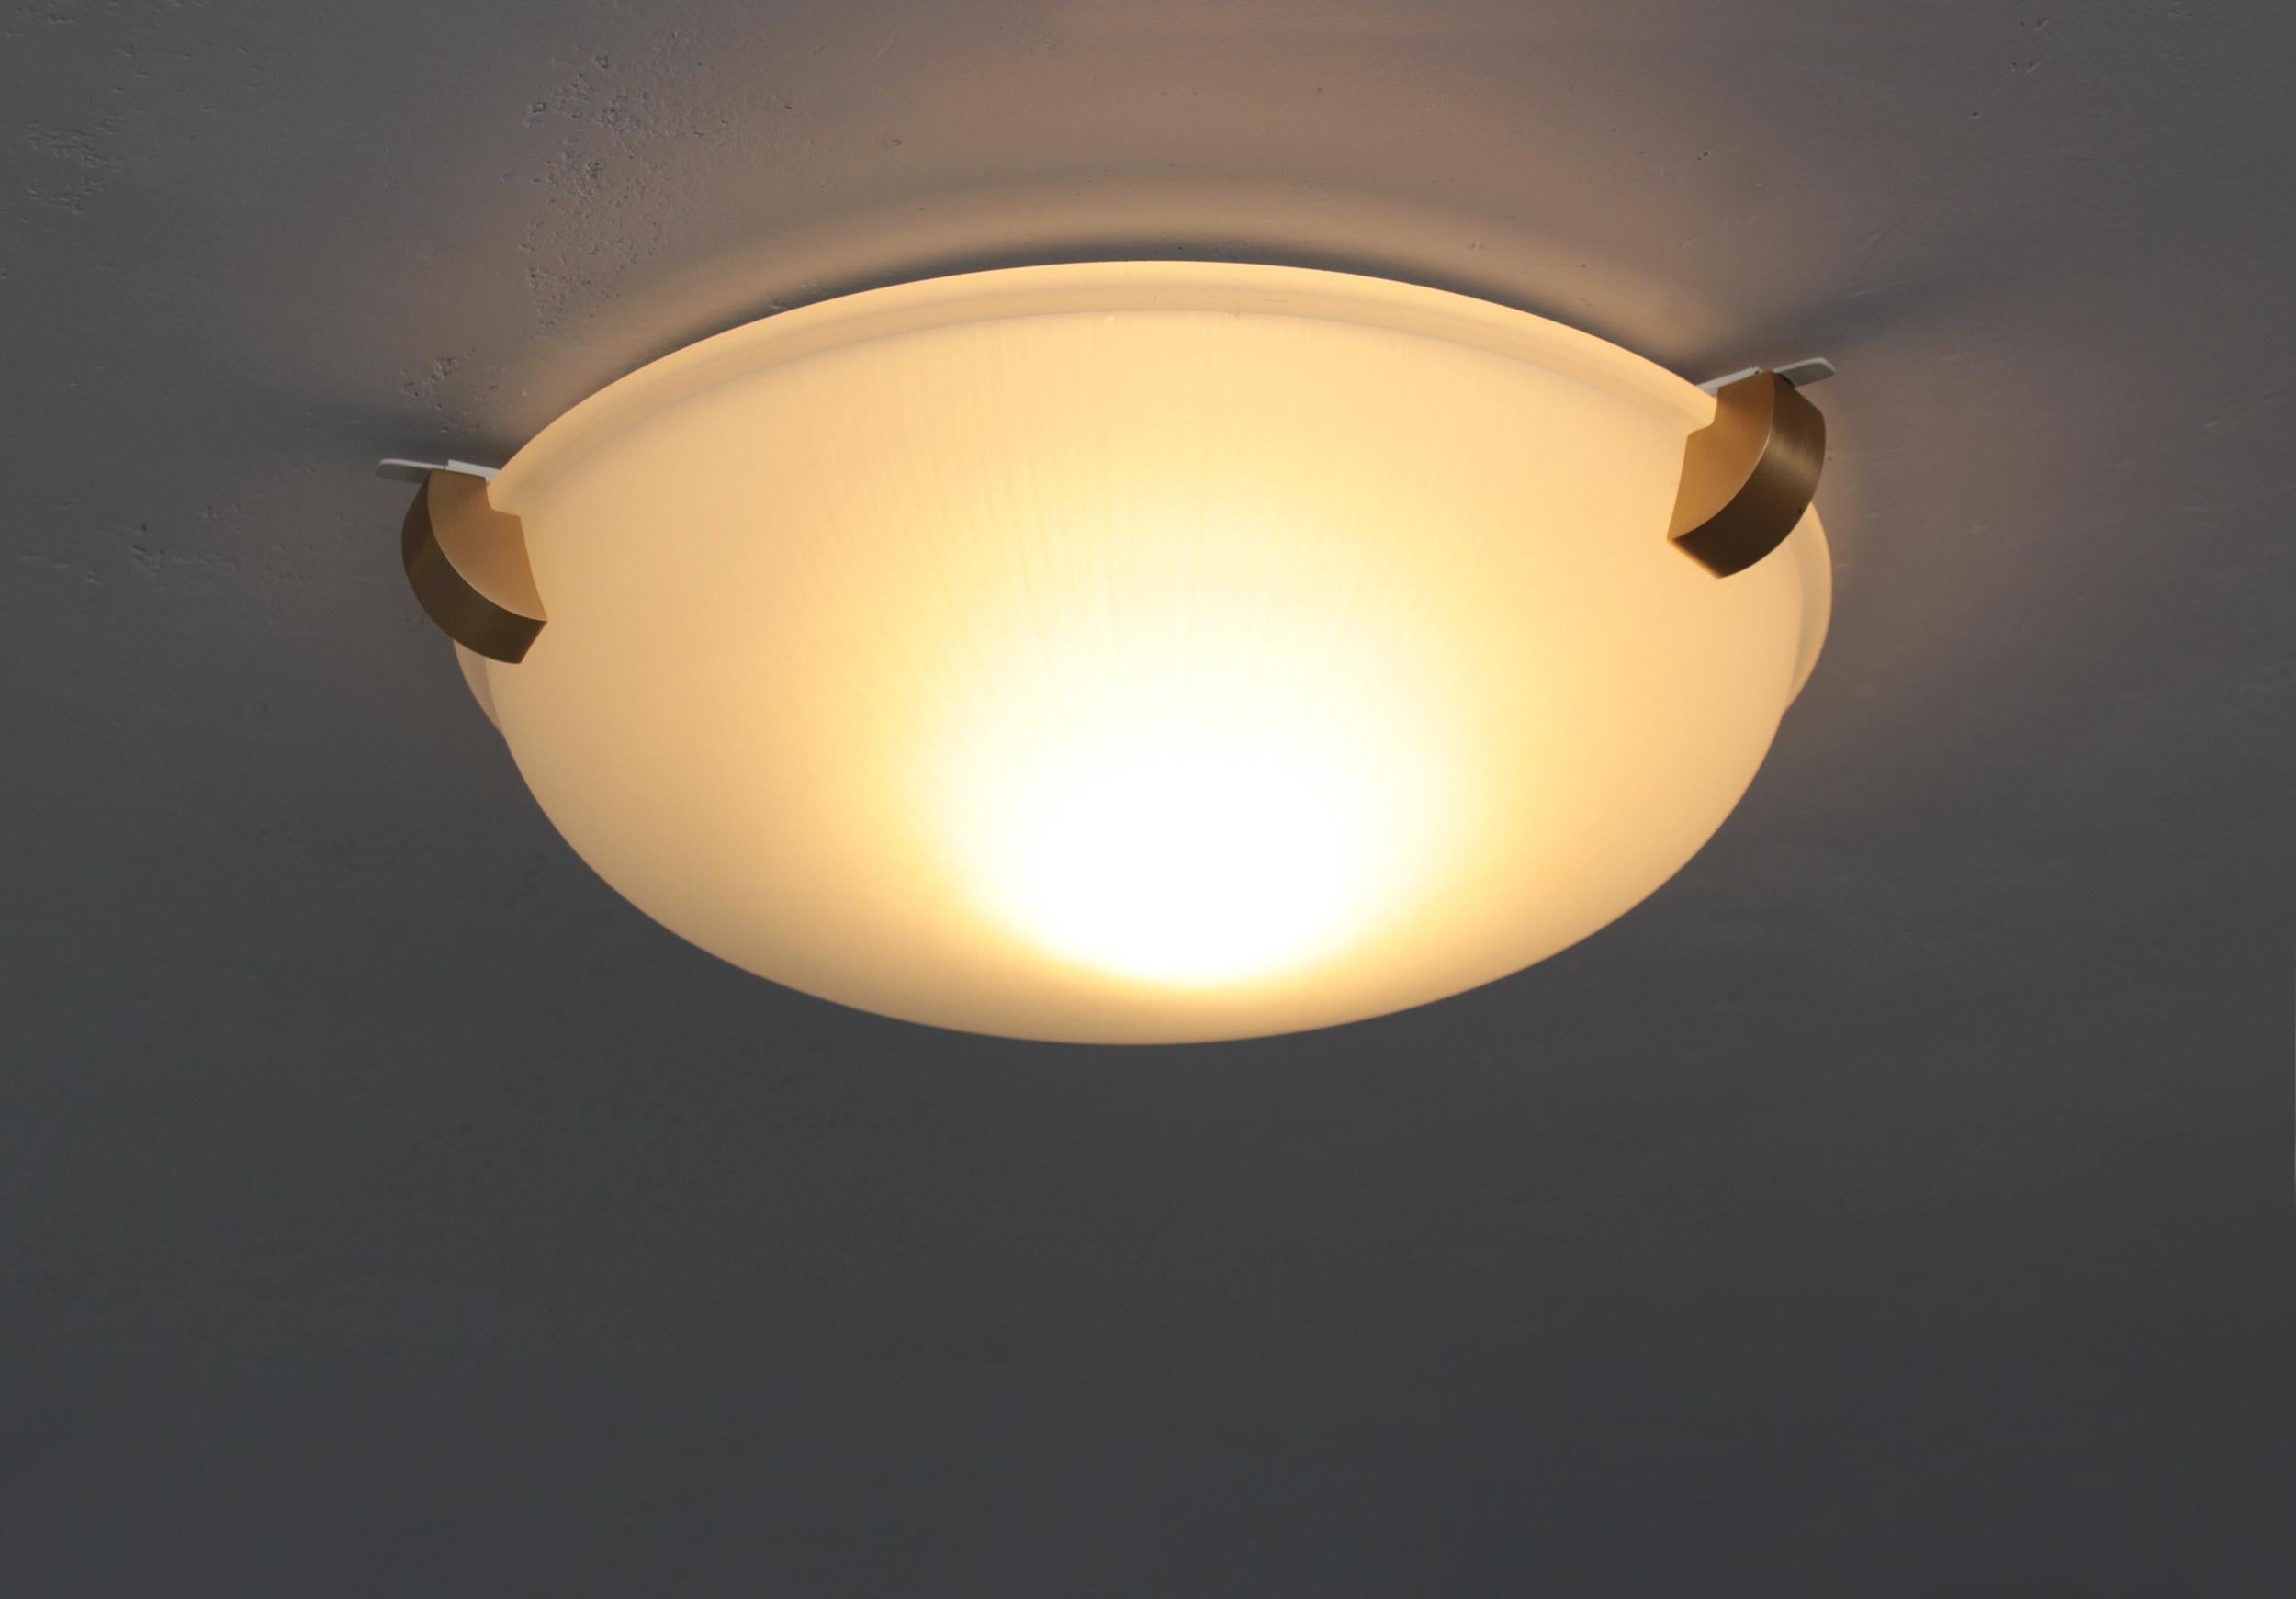 Atelier Jean Perzel - A fine French Art Deco flush mount ceiling fixtures or wall light with a round frosted glass shade supported by three bronze studs.